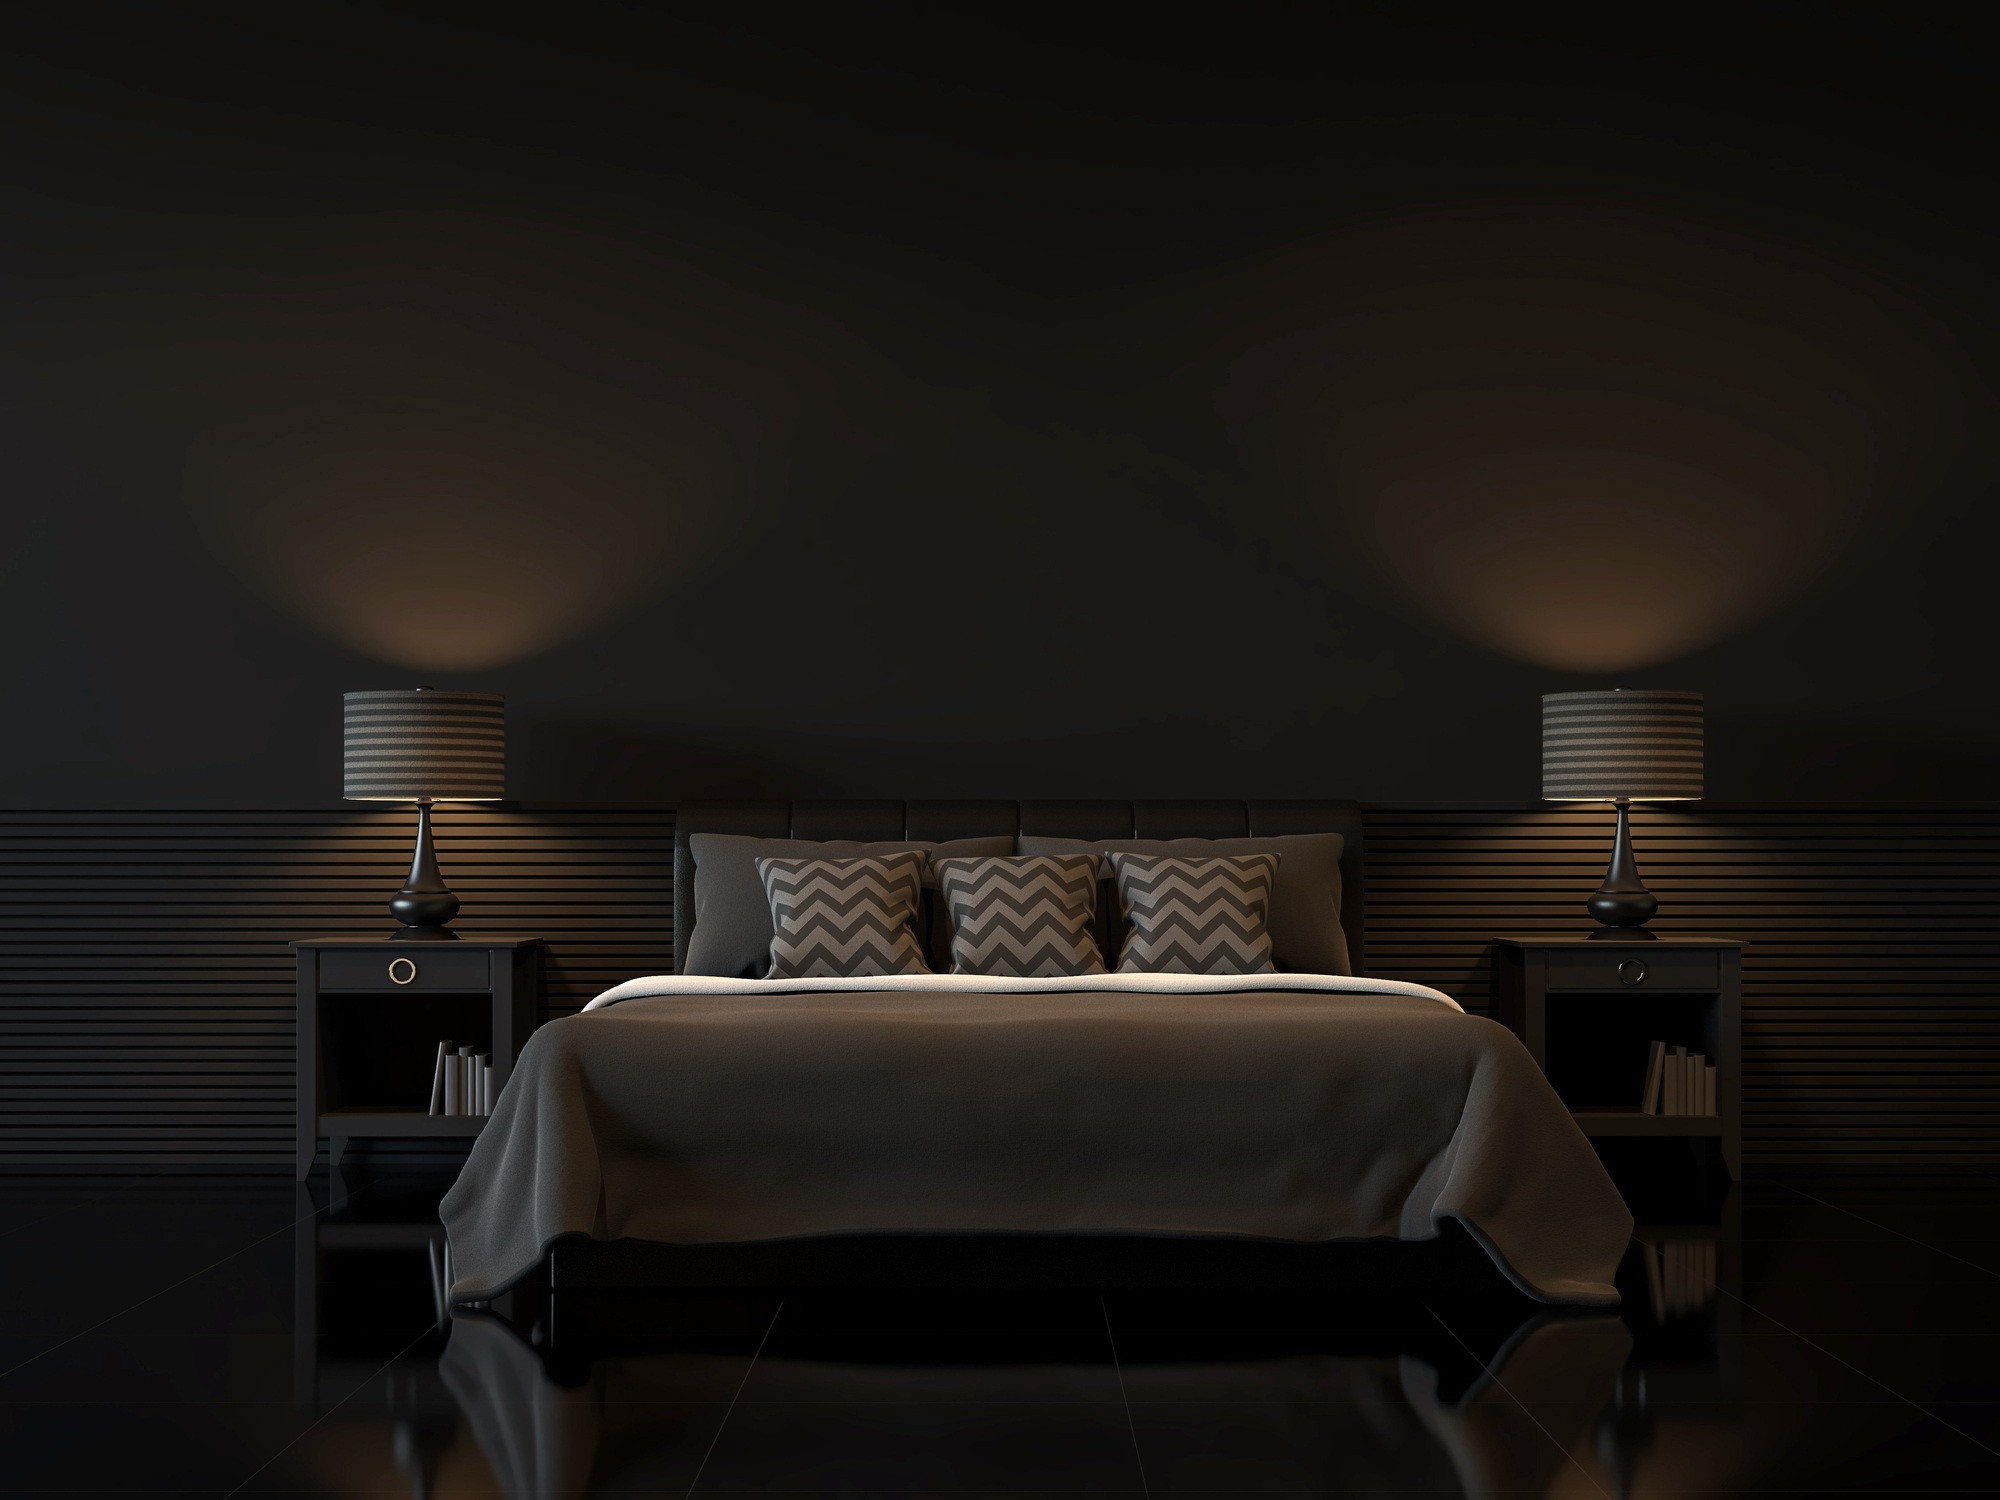 Dark Paint In Bedroom
 These Are the Worst Paint Colors You Should Never Use in